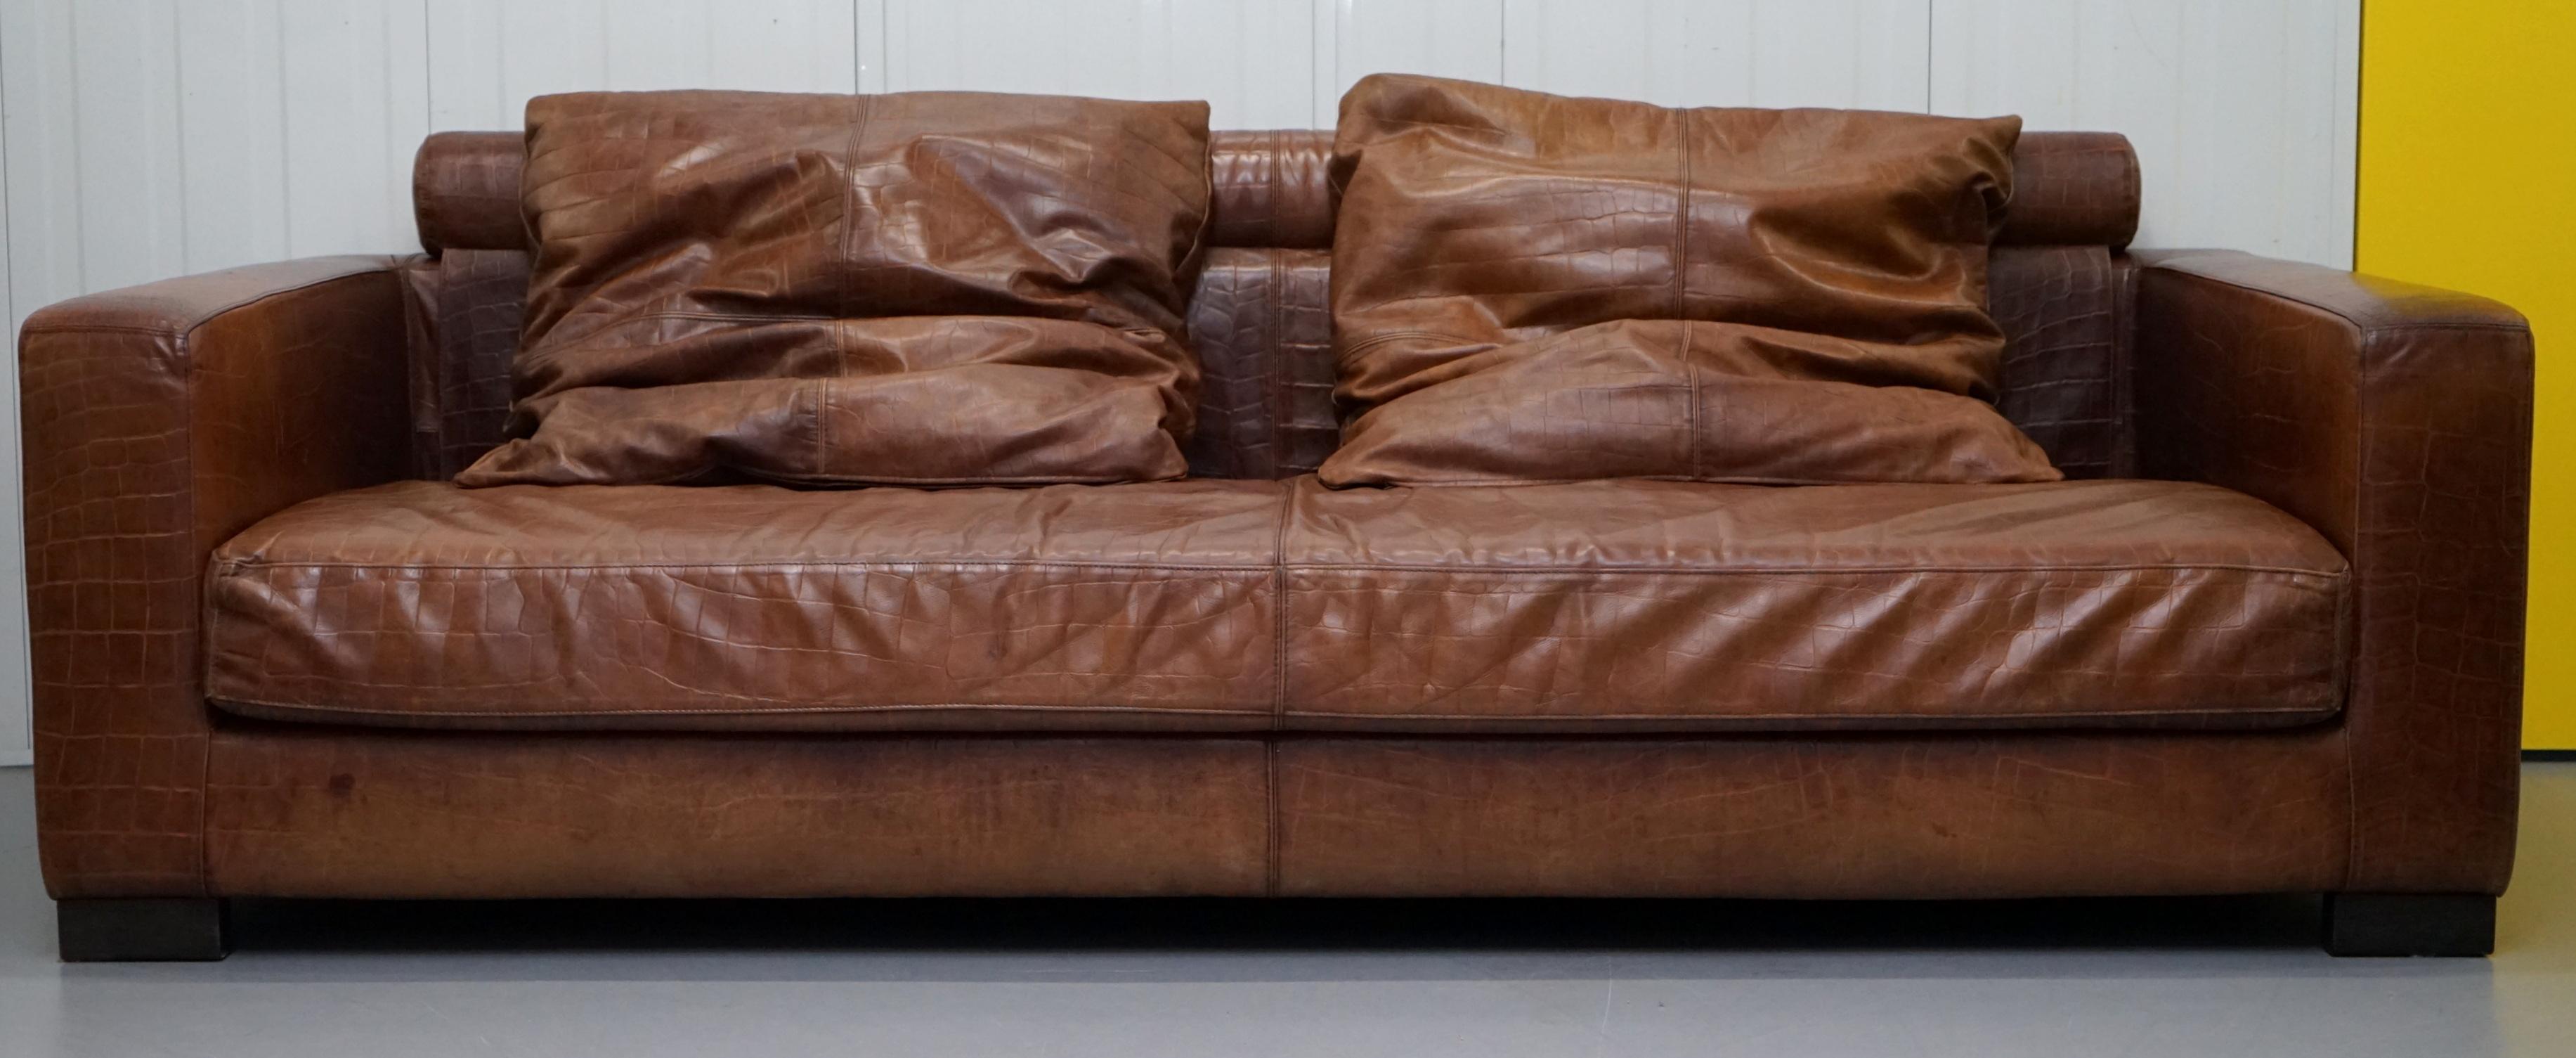 We are delighted to offer for sale this very rare RRP £15,500 brown leather with Crocodile patina Fendi Casa sofa bought from Chicago Home Design

This sofa is amazing, it is very large and deep, it has one long bench cushion as opposed to three